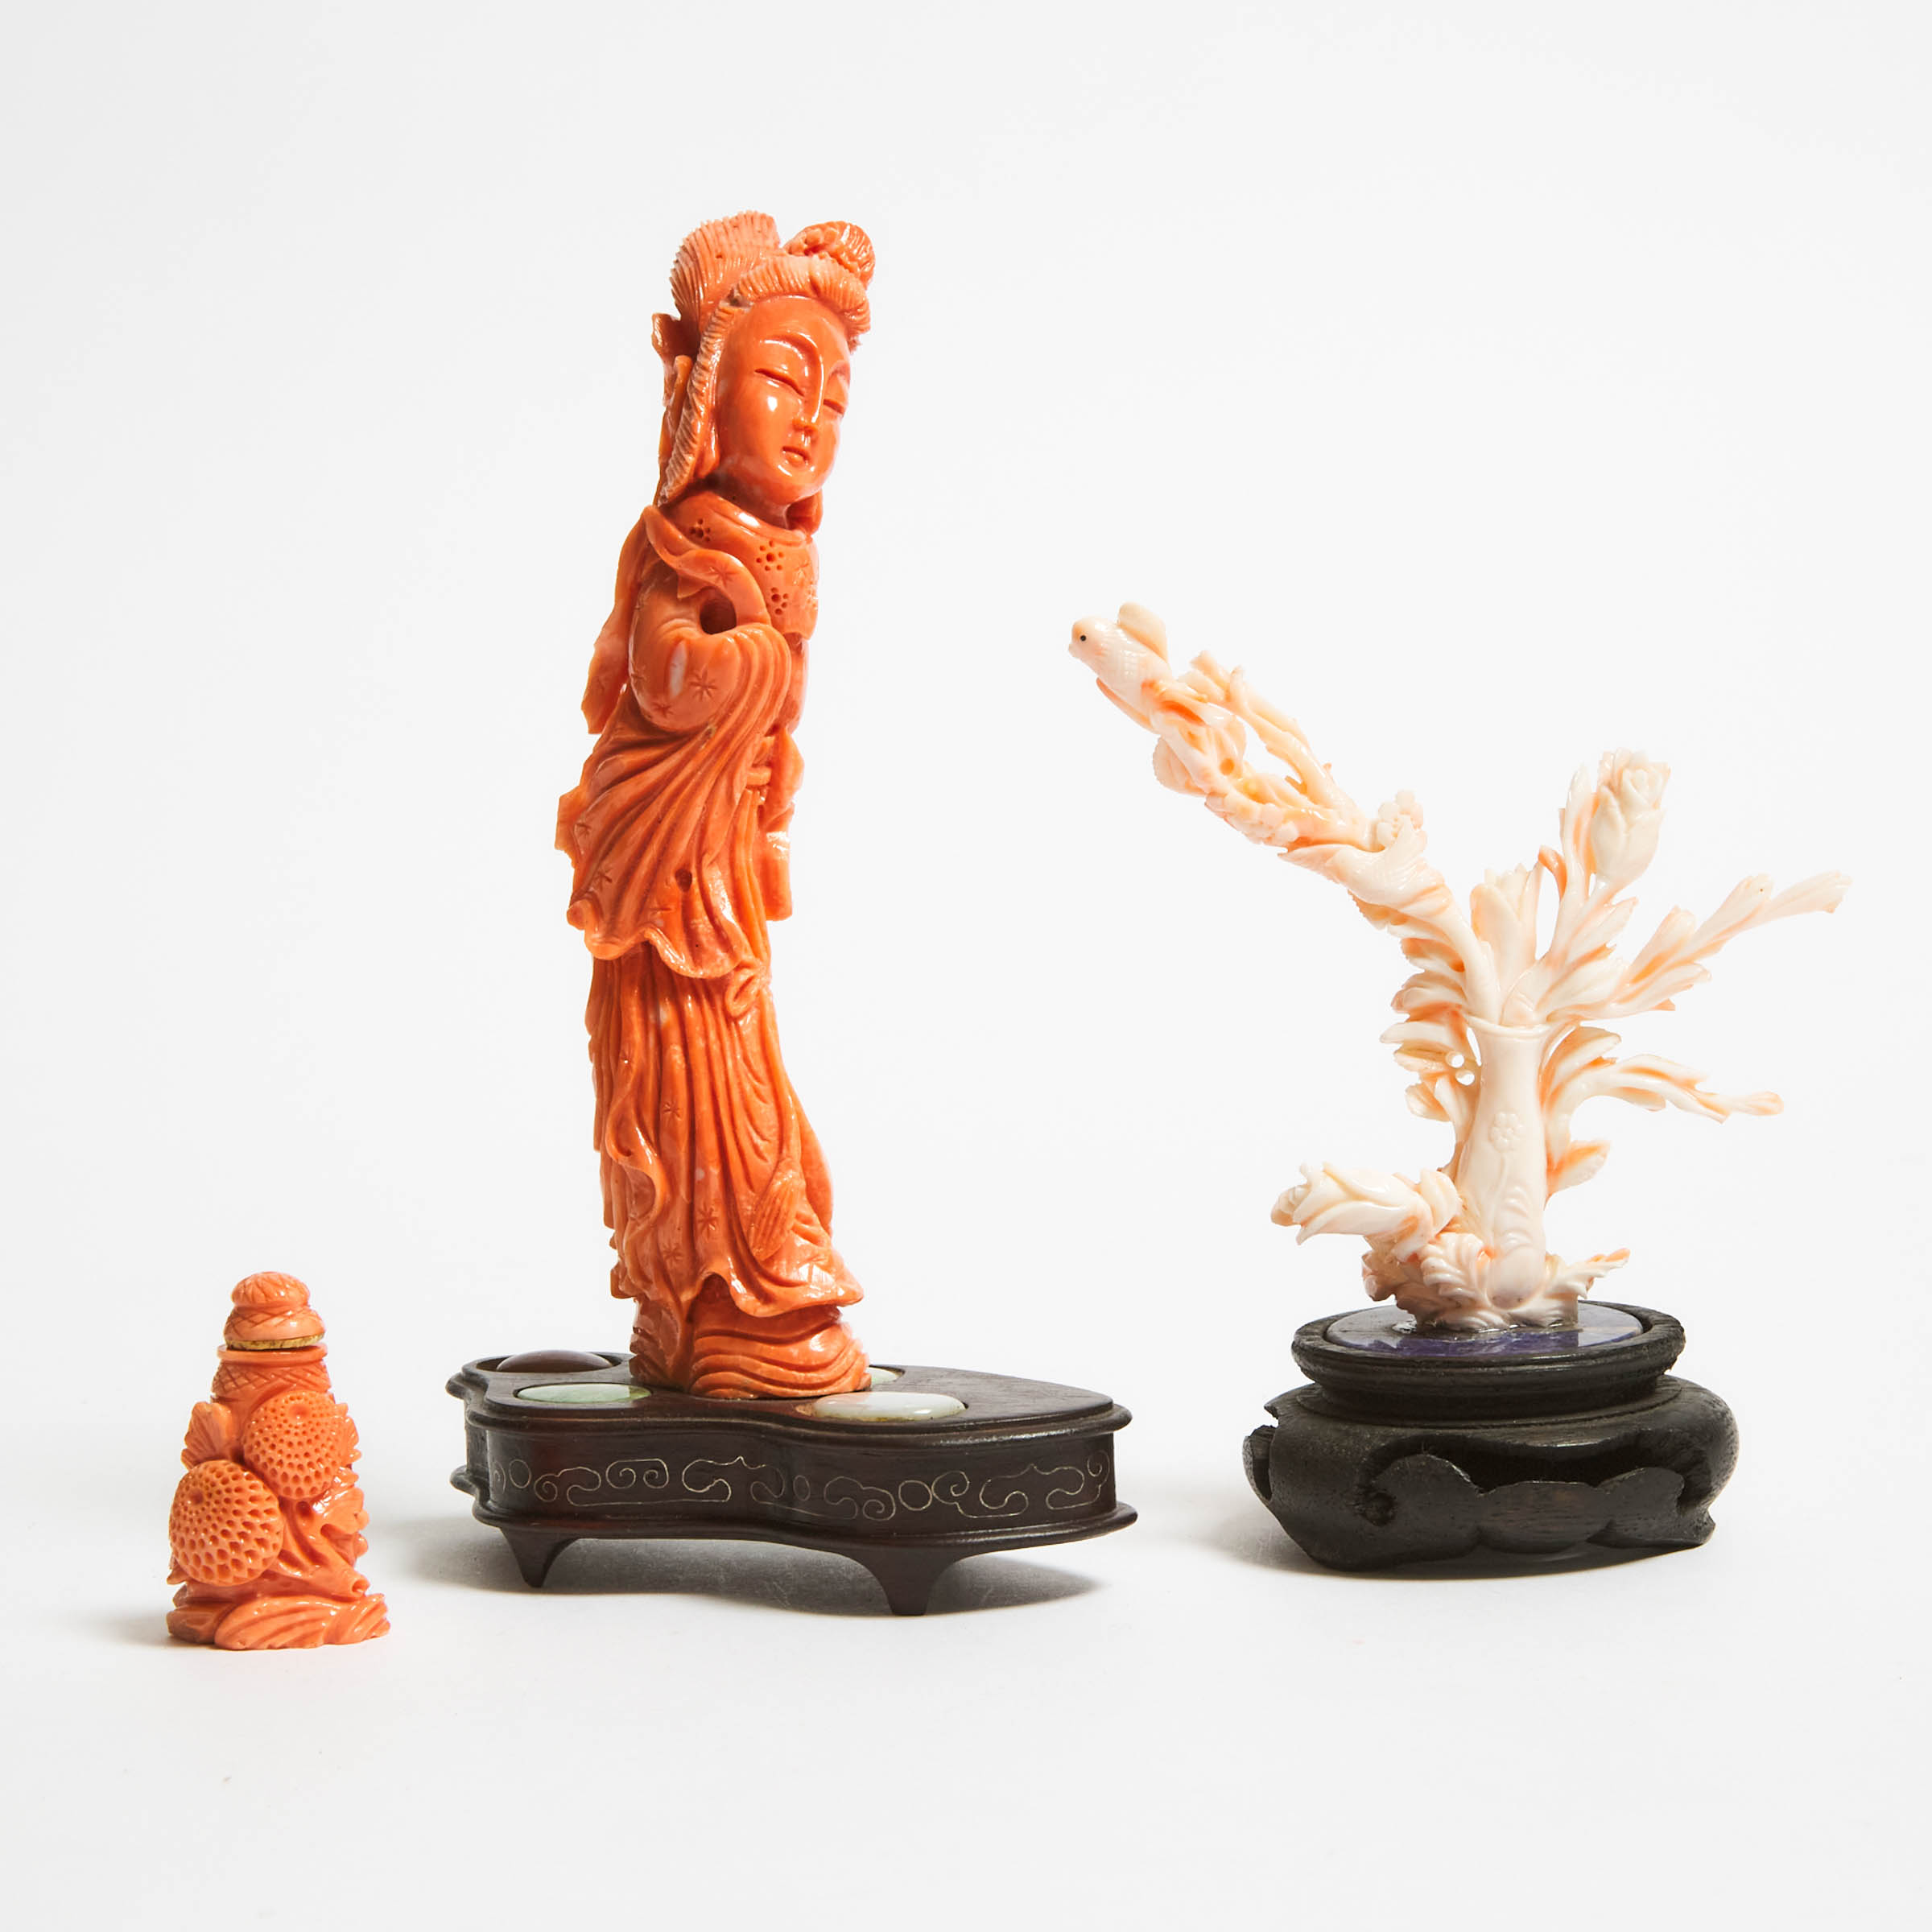 A Group of Three Coral Carvings, Late Qing/Republican Period